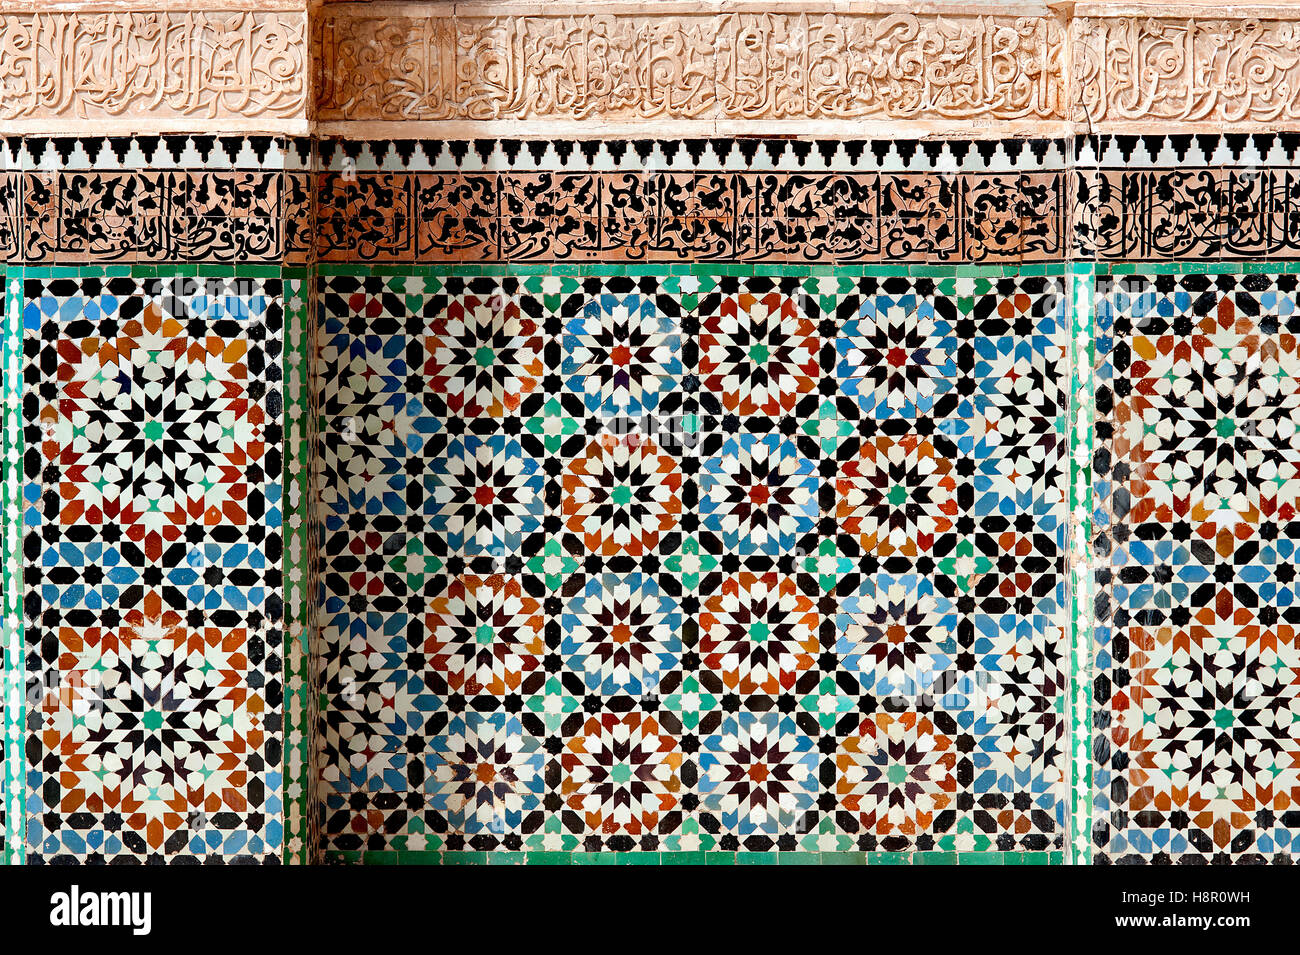 Ben Youssef 'madrasa', Marrakesh, Morocco: colorful mosaics and calligraphy adorn the walls of the Ben Youssef Islamic college. Stock Photo